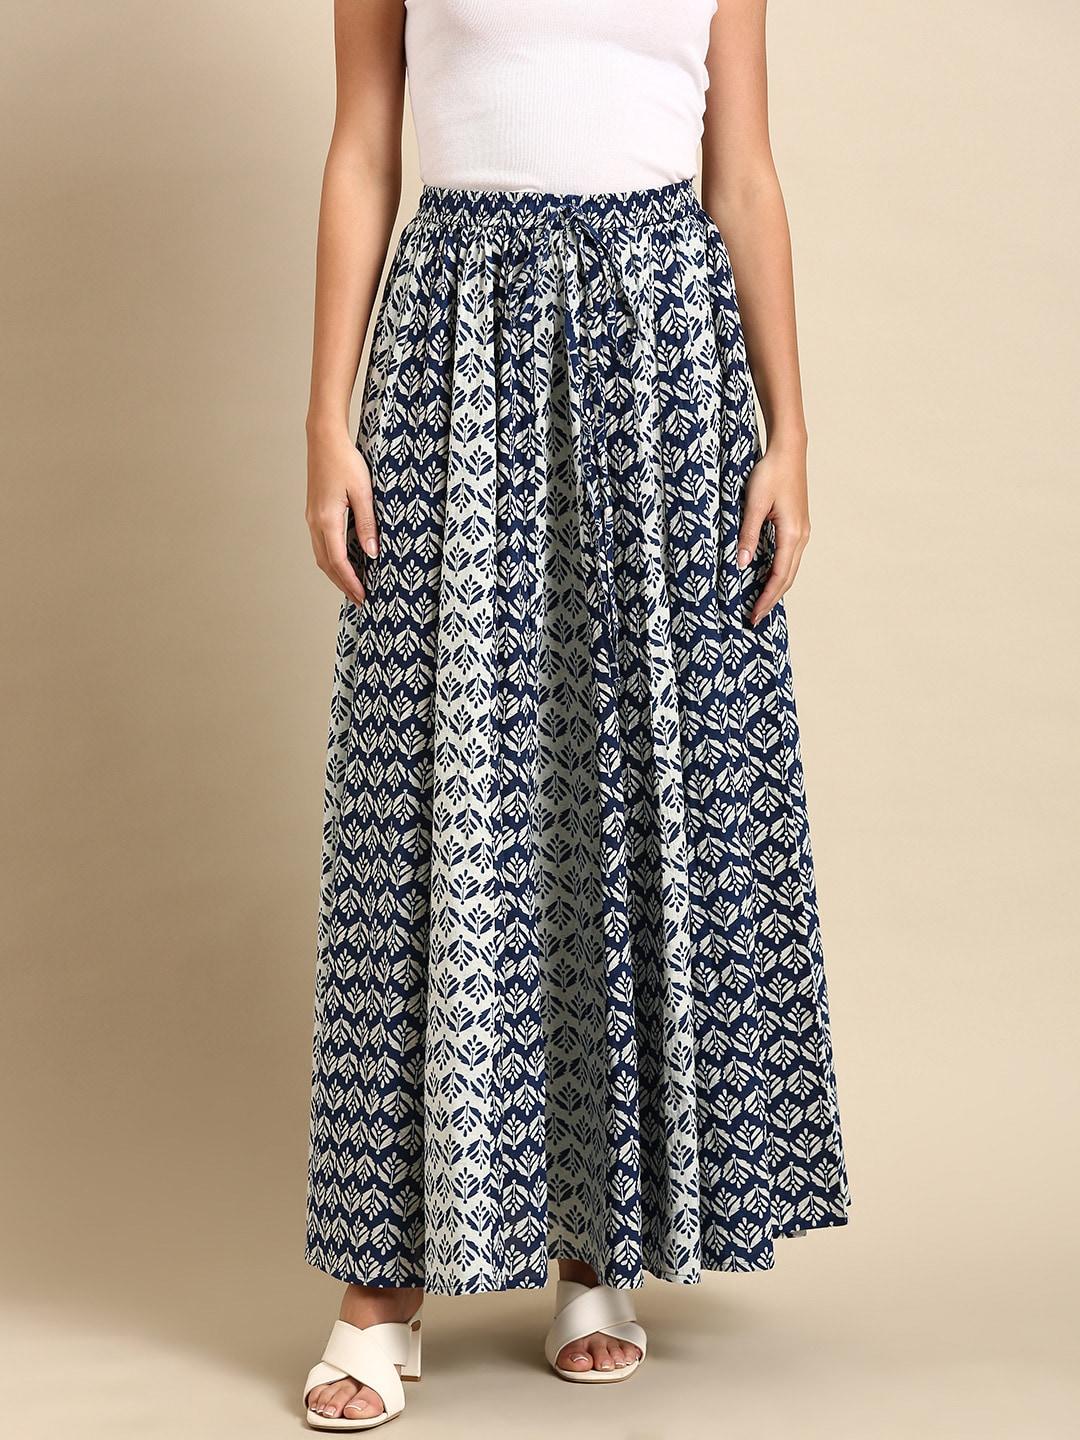 anayna women floral printed pleated flared maxi skirt